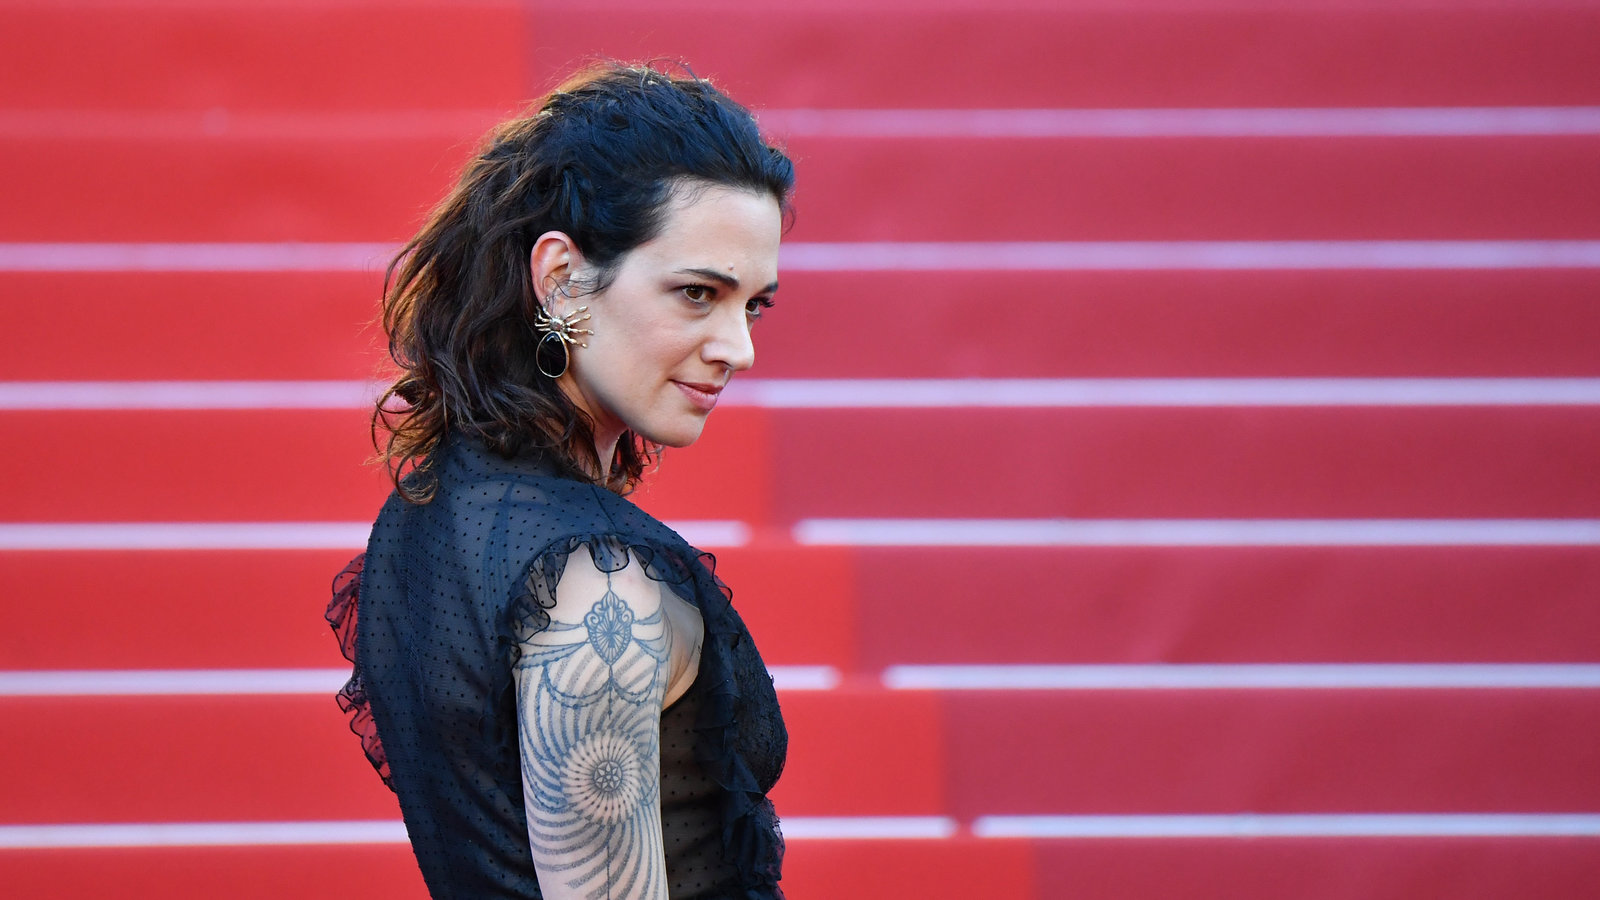 Asia Argento a MeToo Leader Made a Deal With Her Own Accuser